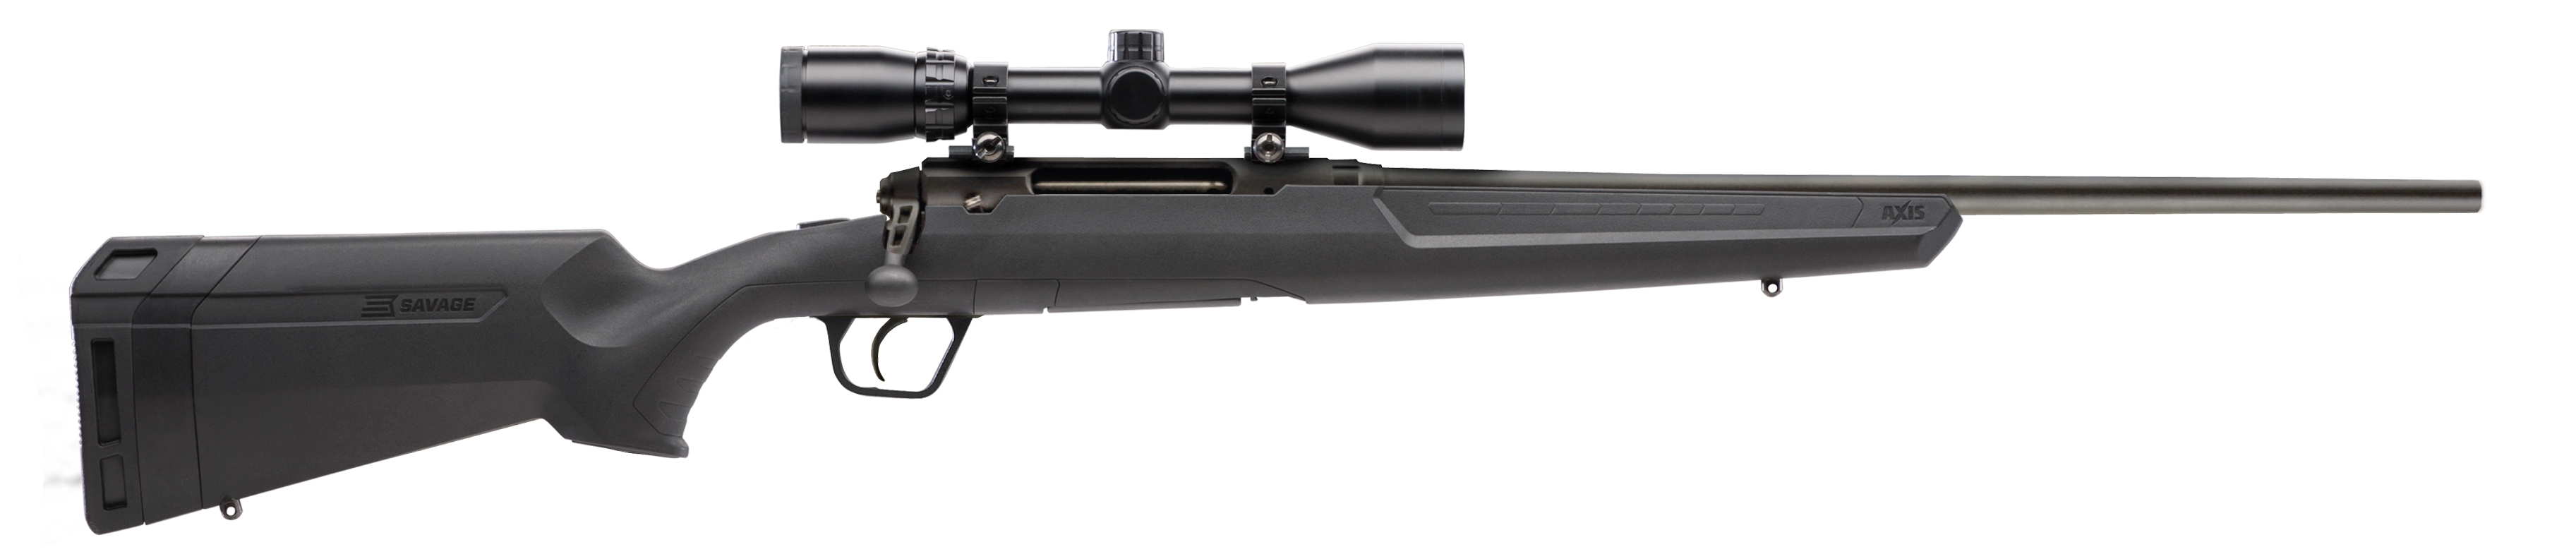 Savage Arms Axis XP Compact 223 Rem